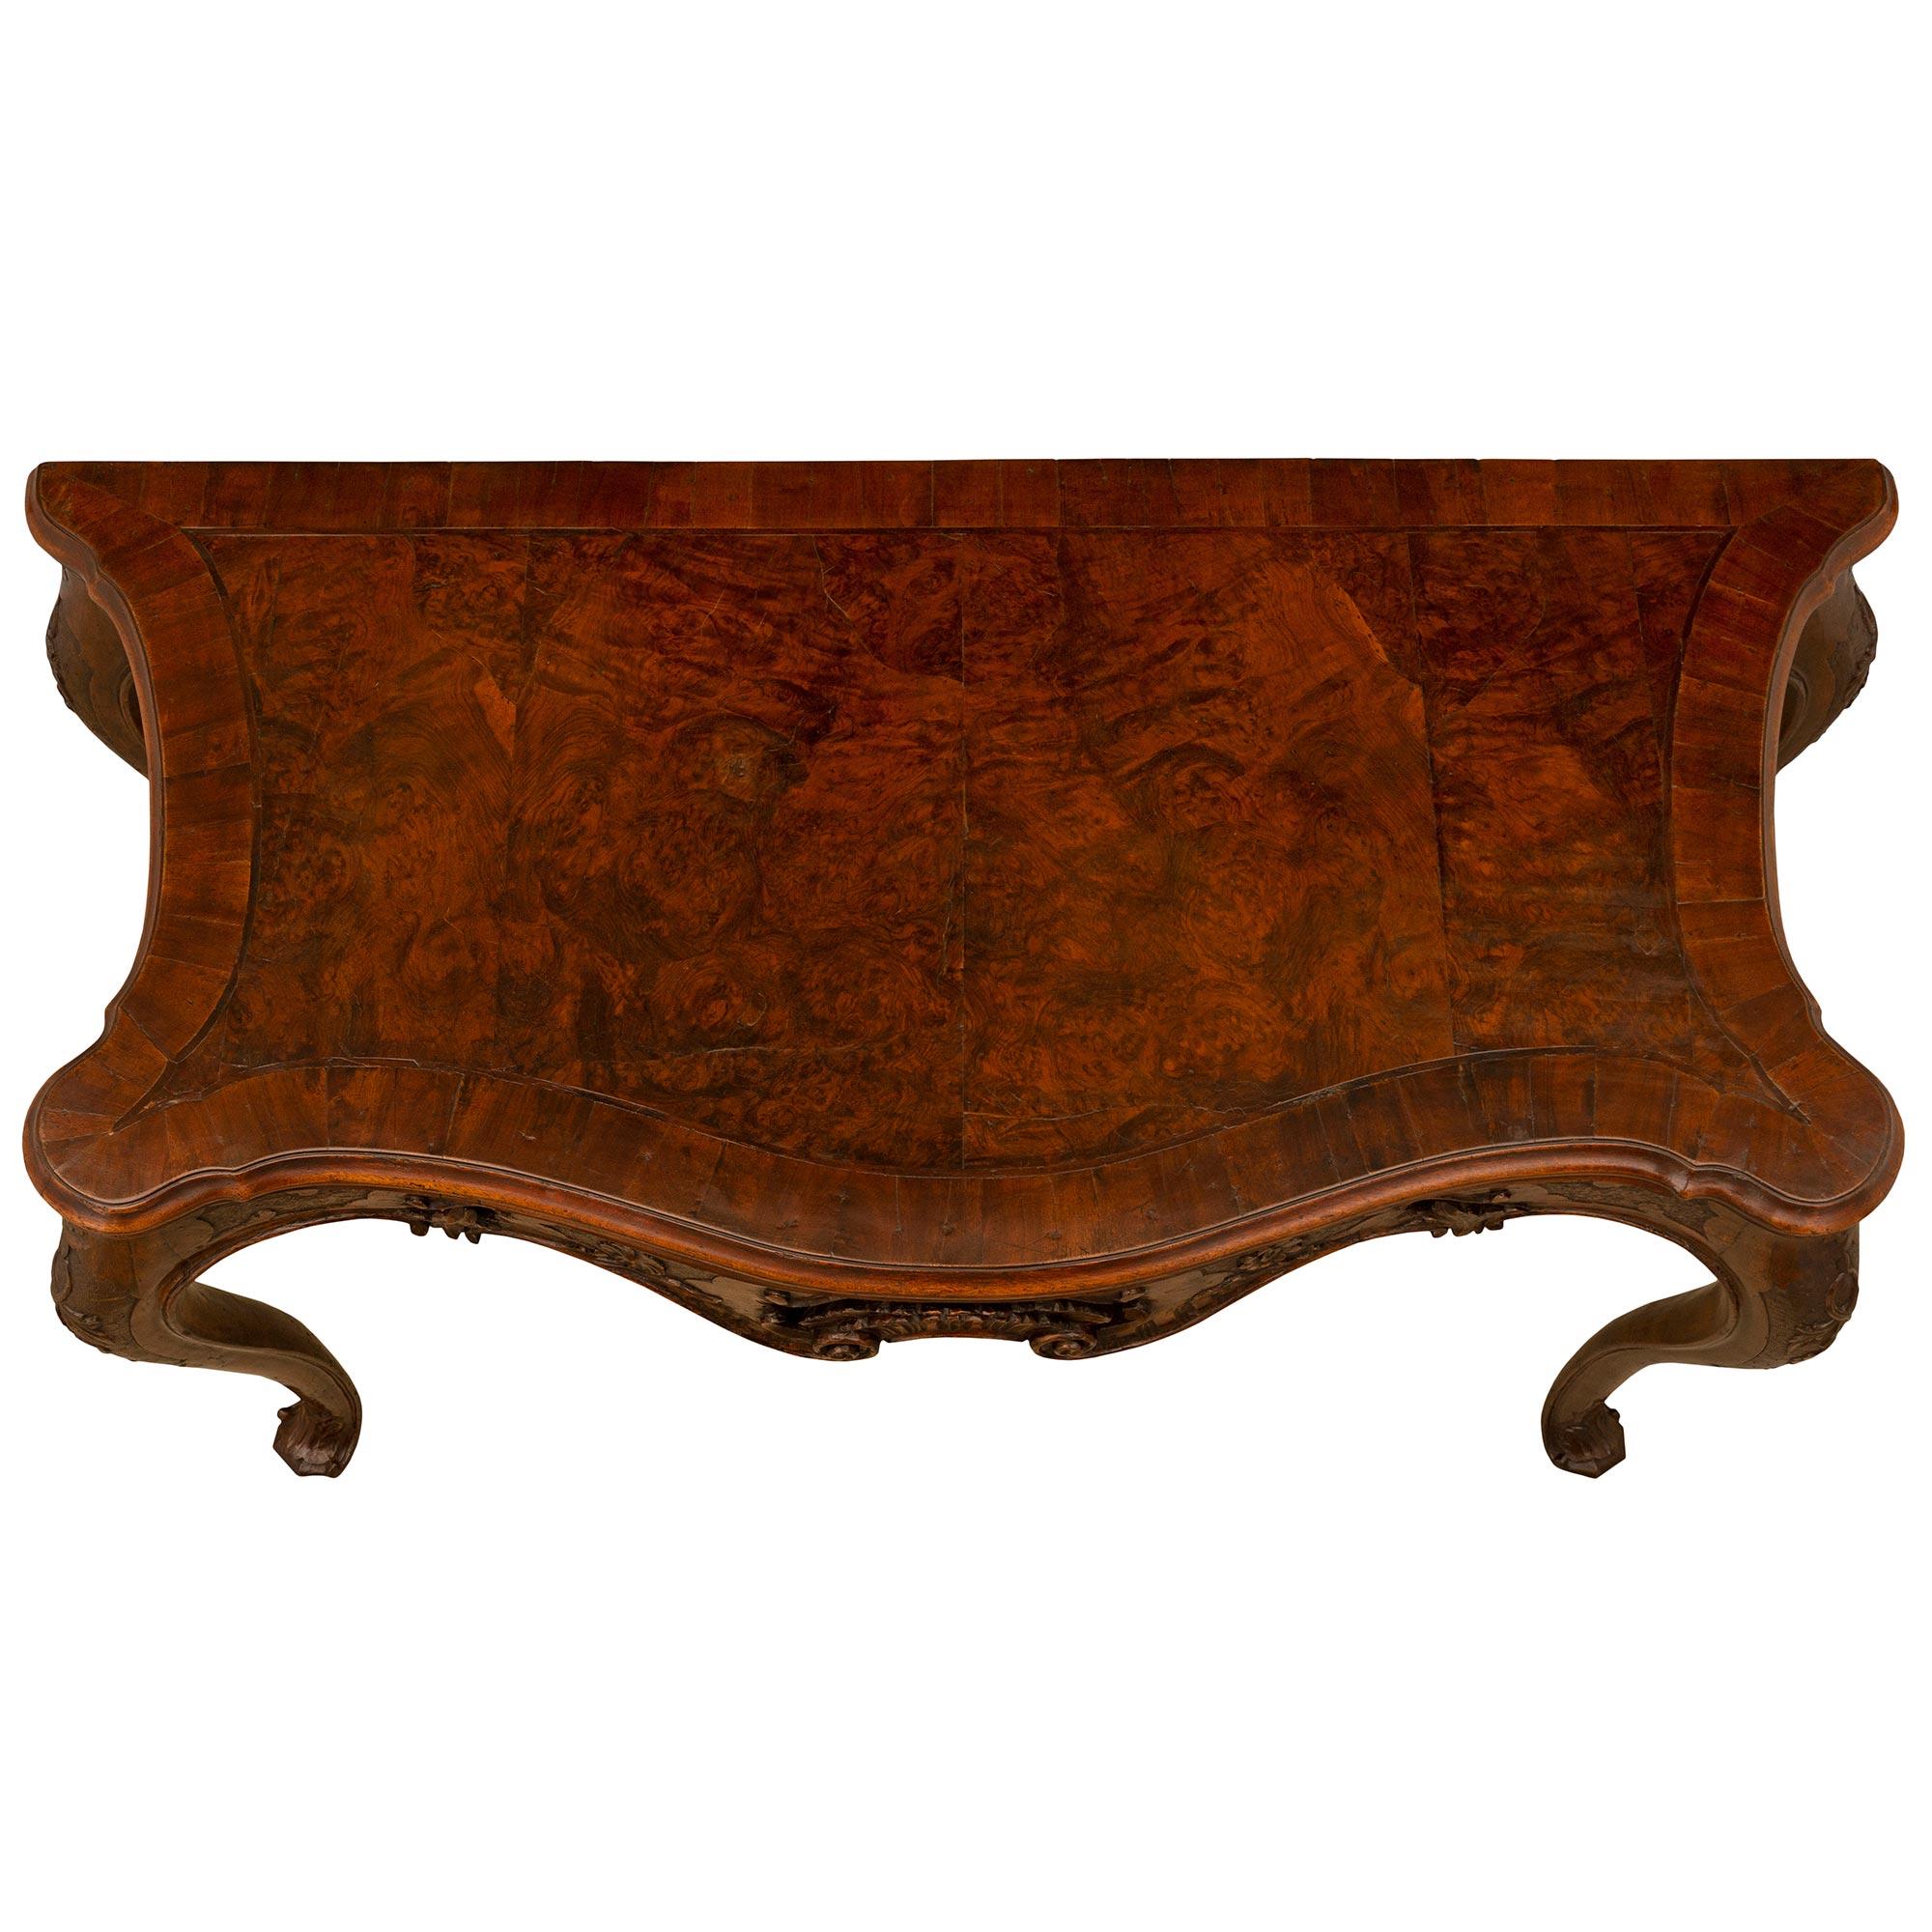 A stunning and extremely decorative Italian 18th century Louis XV period walnut and burl walnut console from Venice. The console is raised by most elegant cabriole legs with beautiful scrolled foliate feet and richly carved interlocking branches and